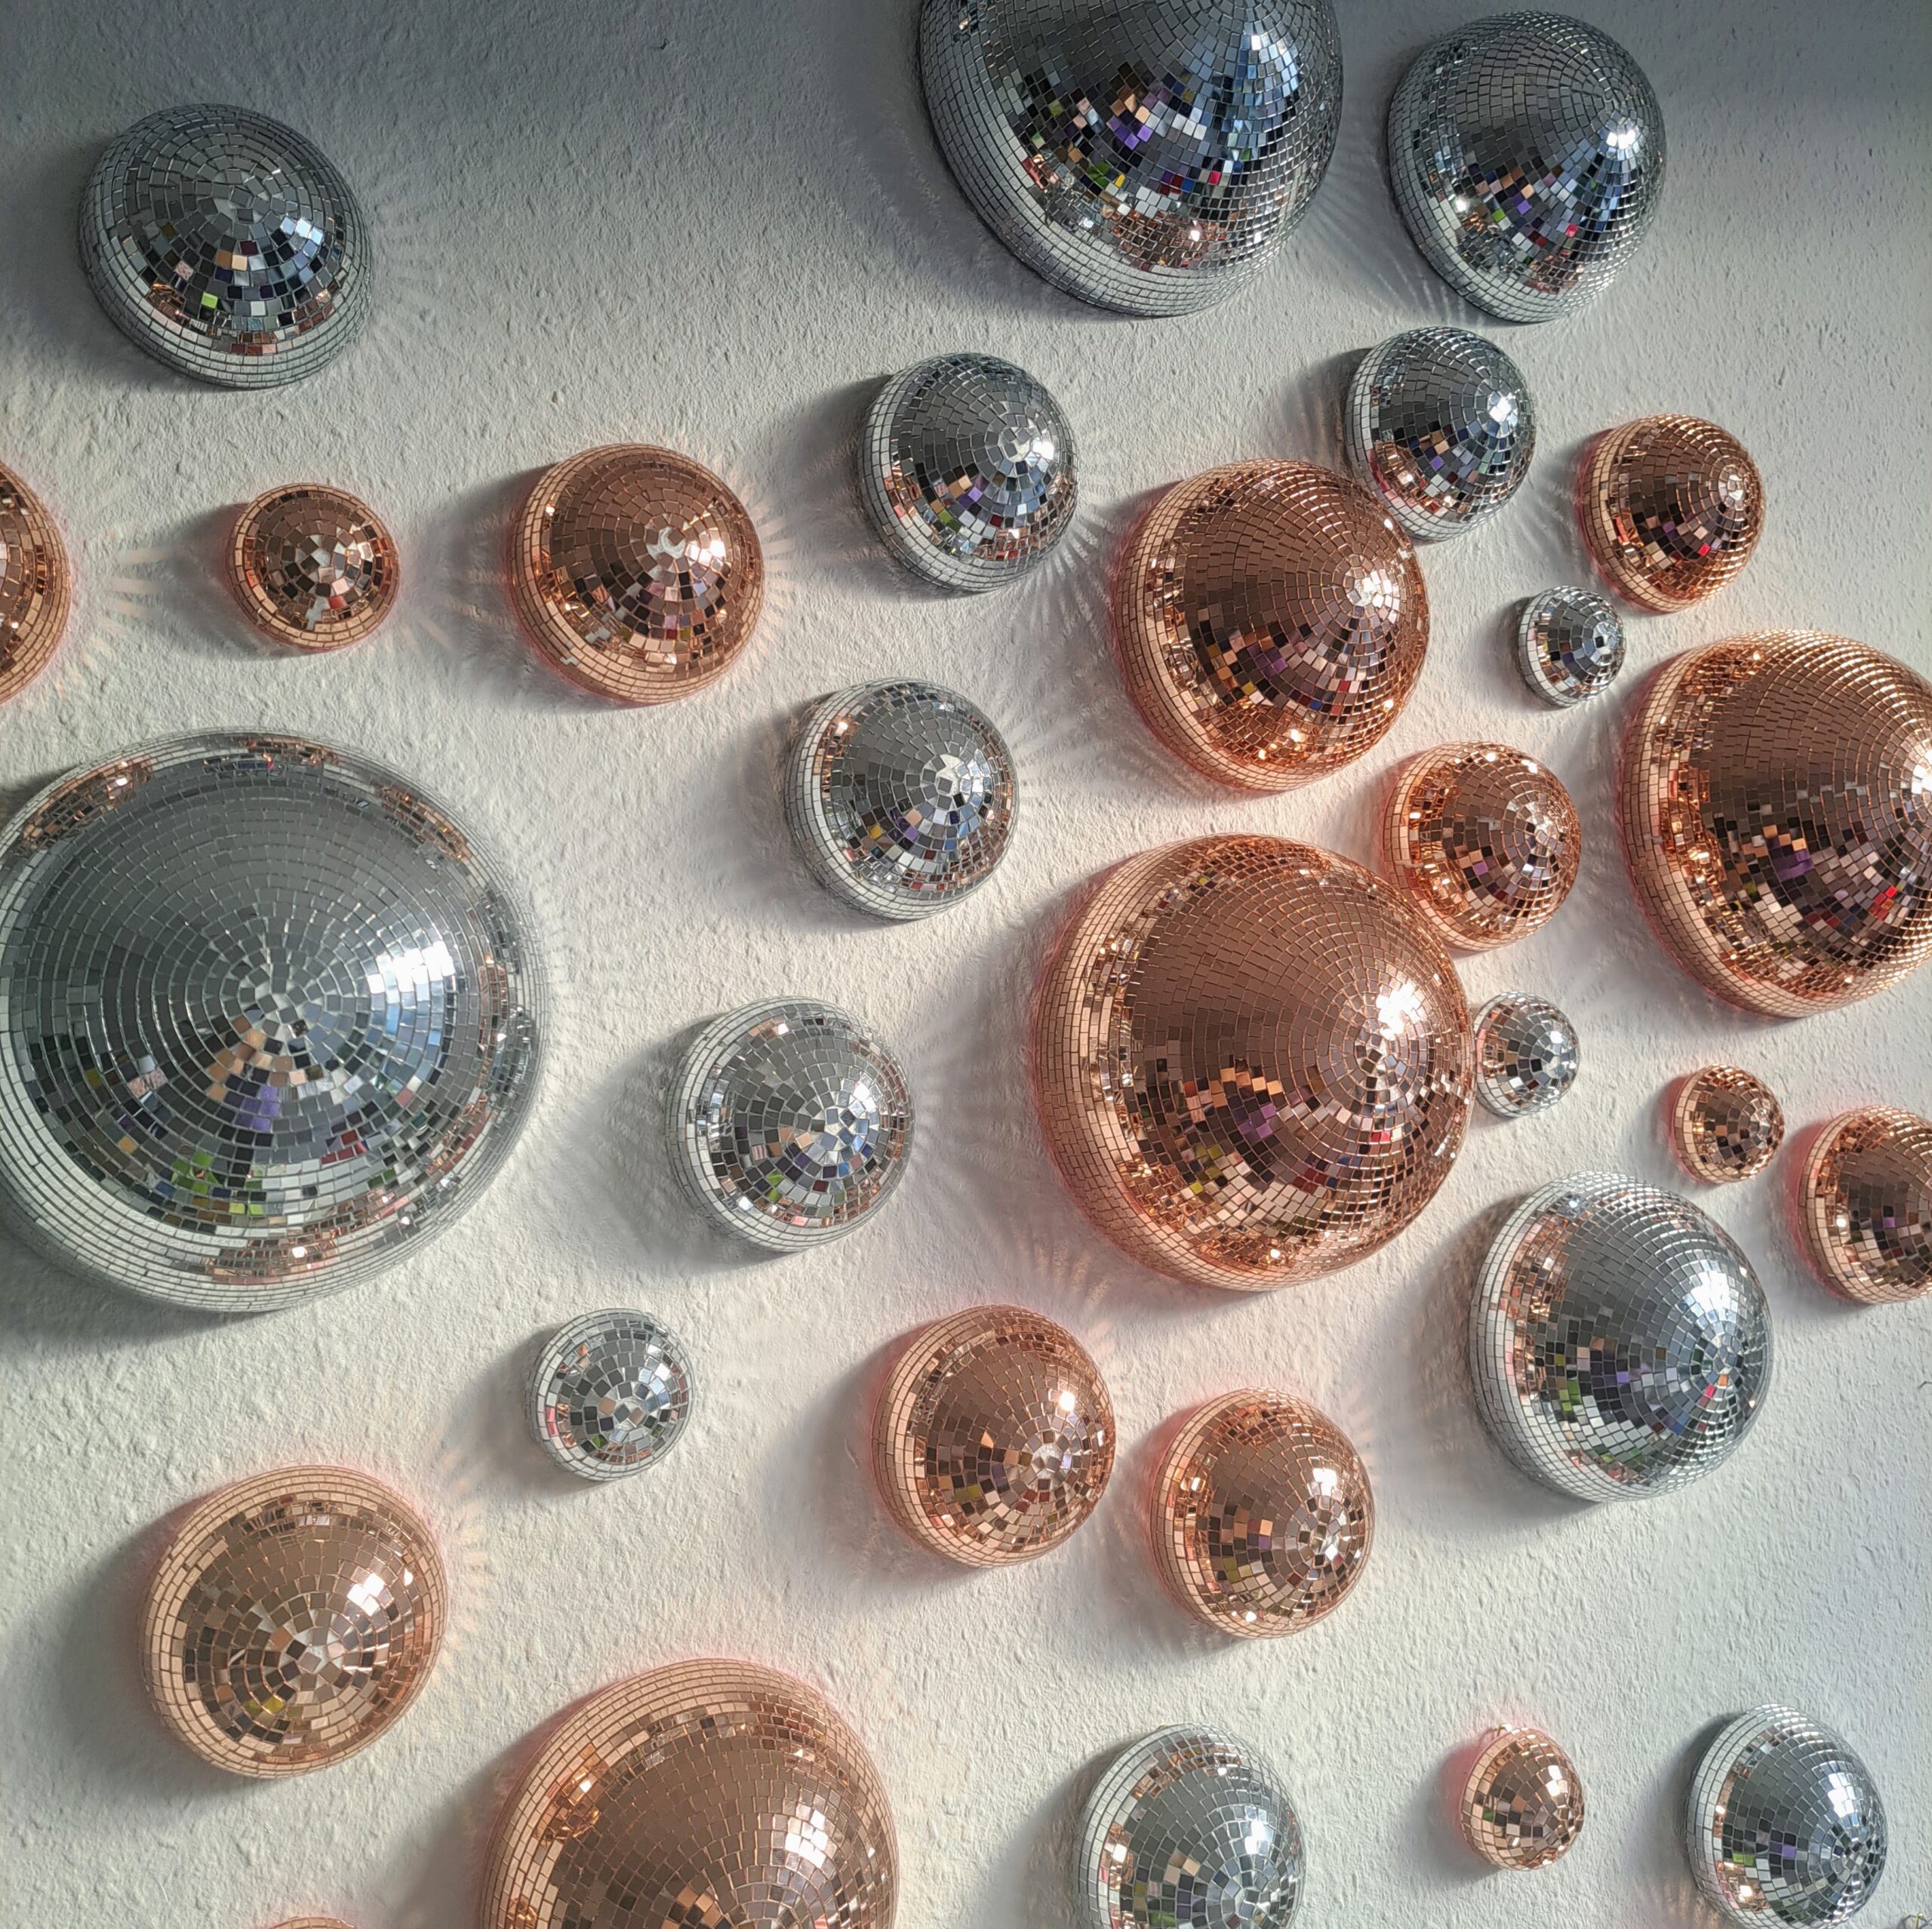 Disco ball wall hangers, pink/rose gold or silver mirror tiles